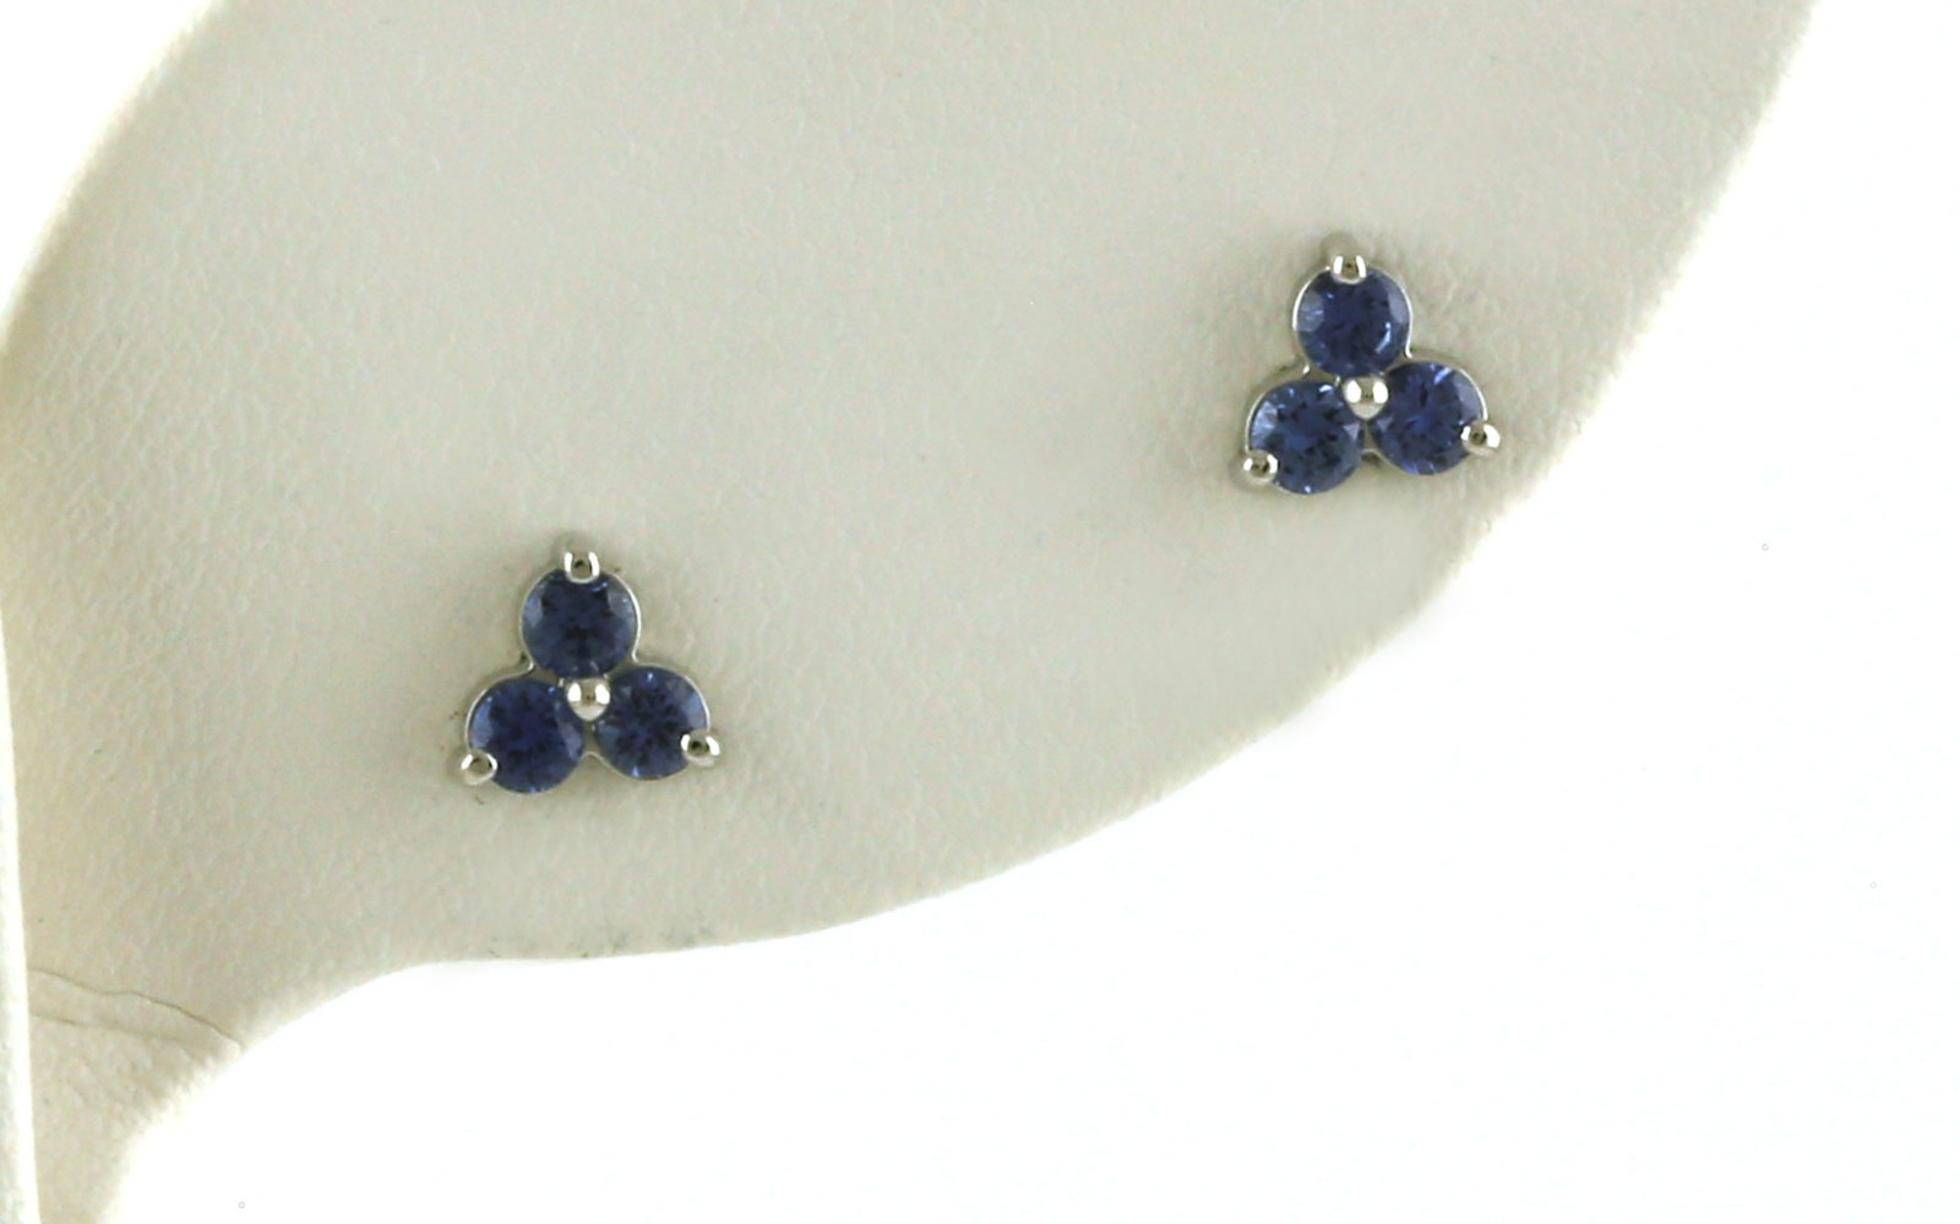 3-Stone Cluster Montana Yogo Sapphire Stud Earrings in White Gold (0.43cts TWT)